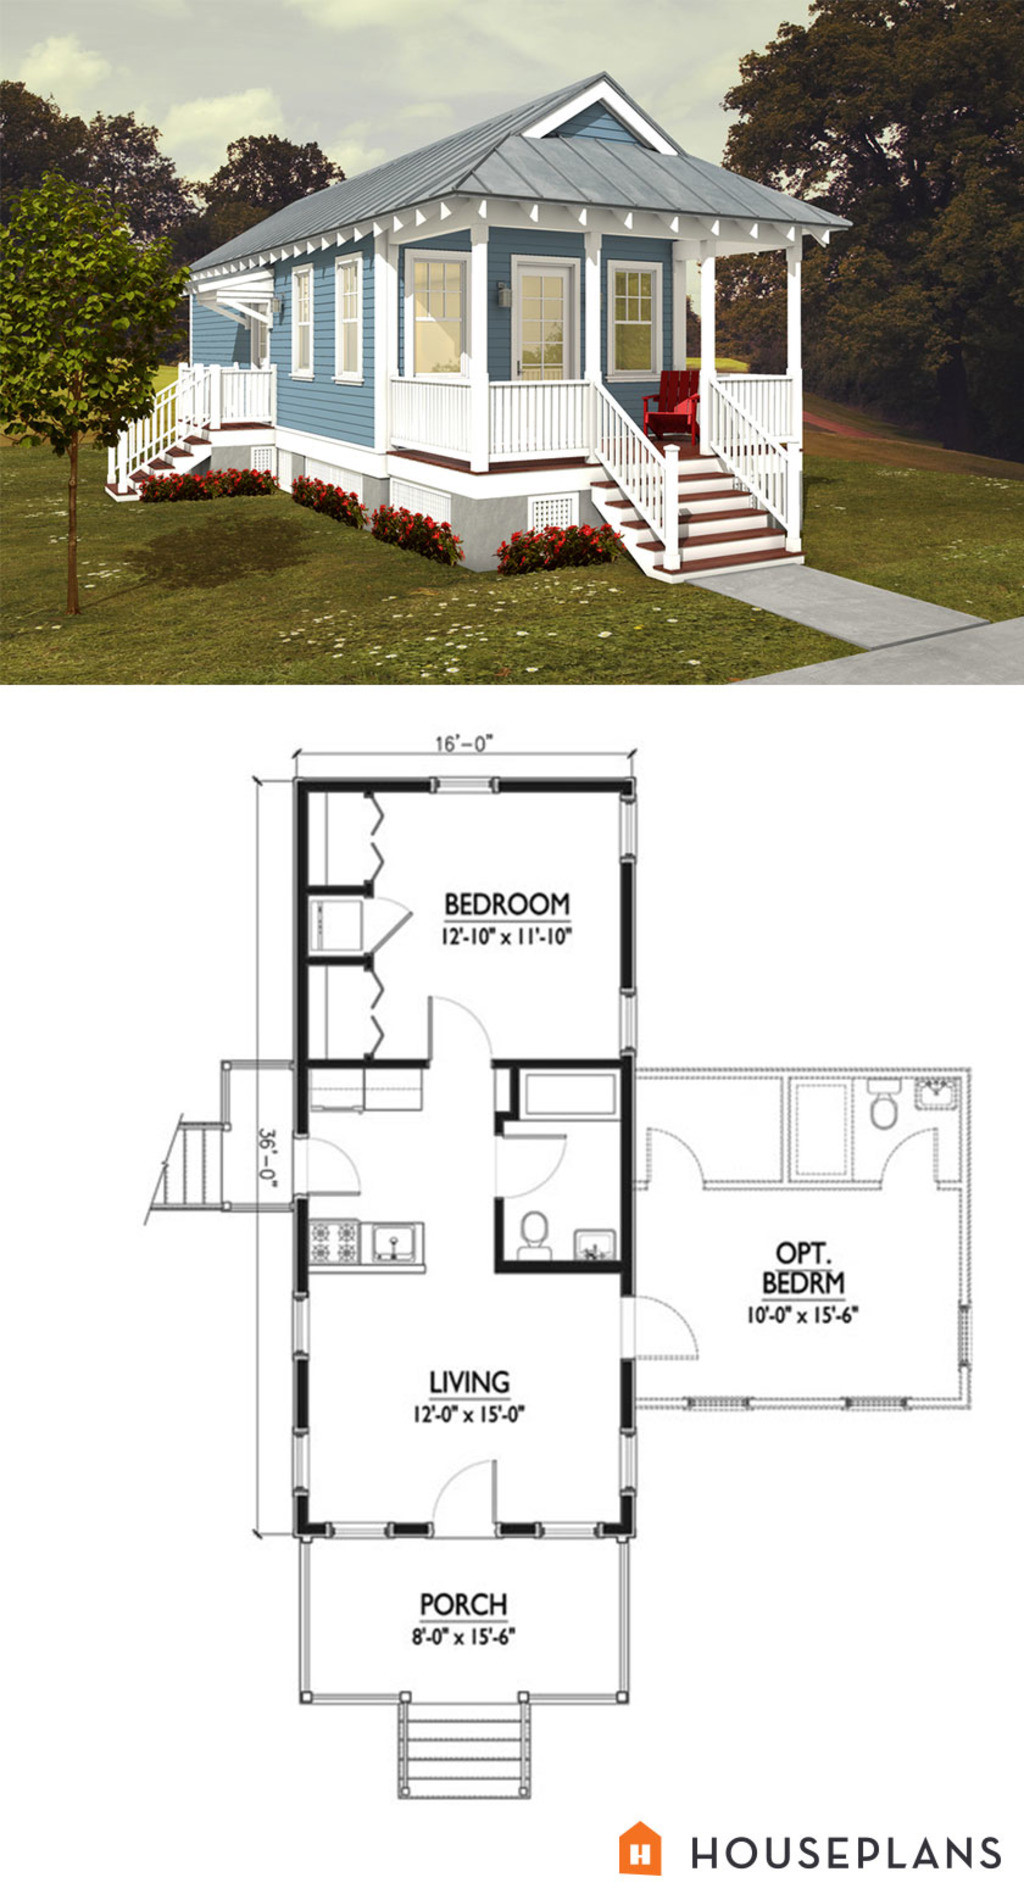 Small 1 Bedroom House Plans
 Cottage Style House Plan 1 Beds 1 Baths 576 Sq Ft Plan